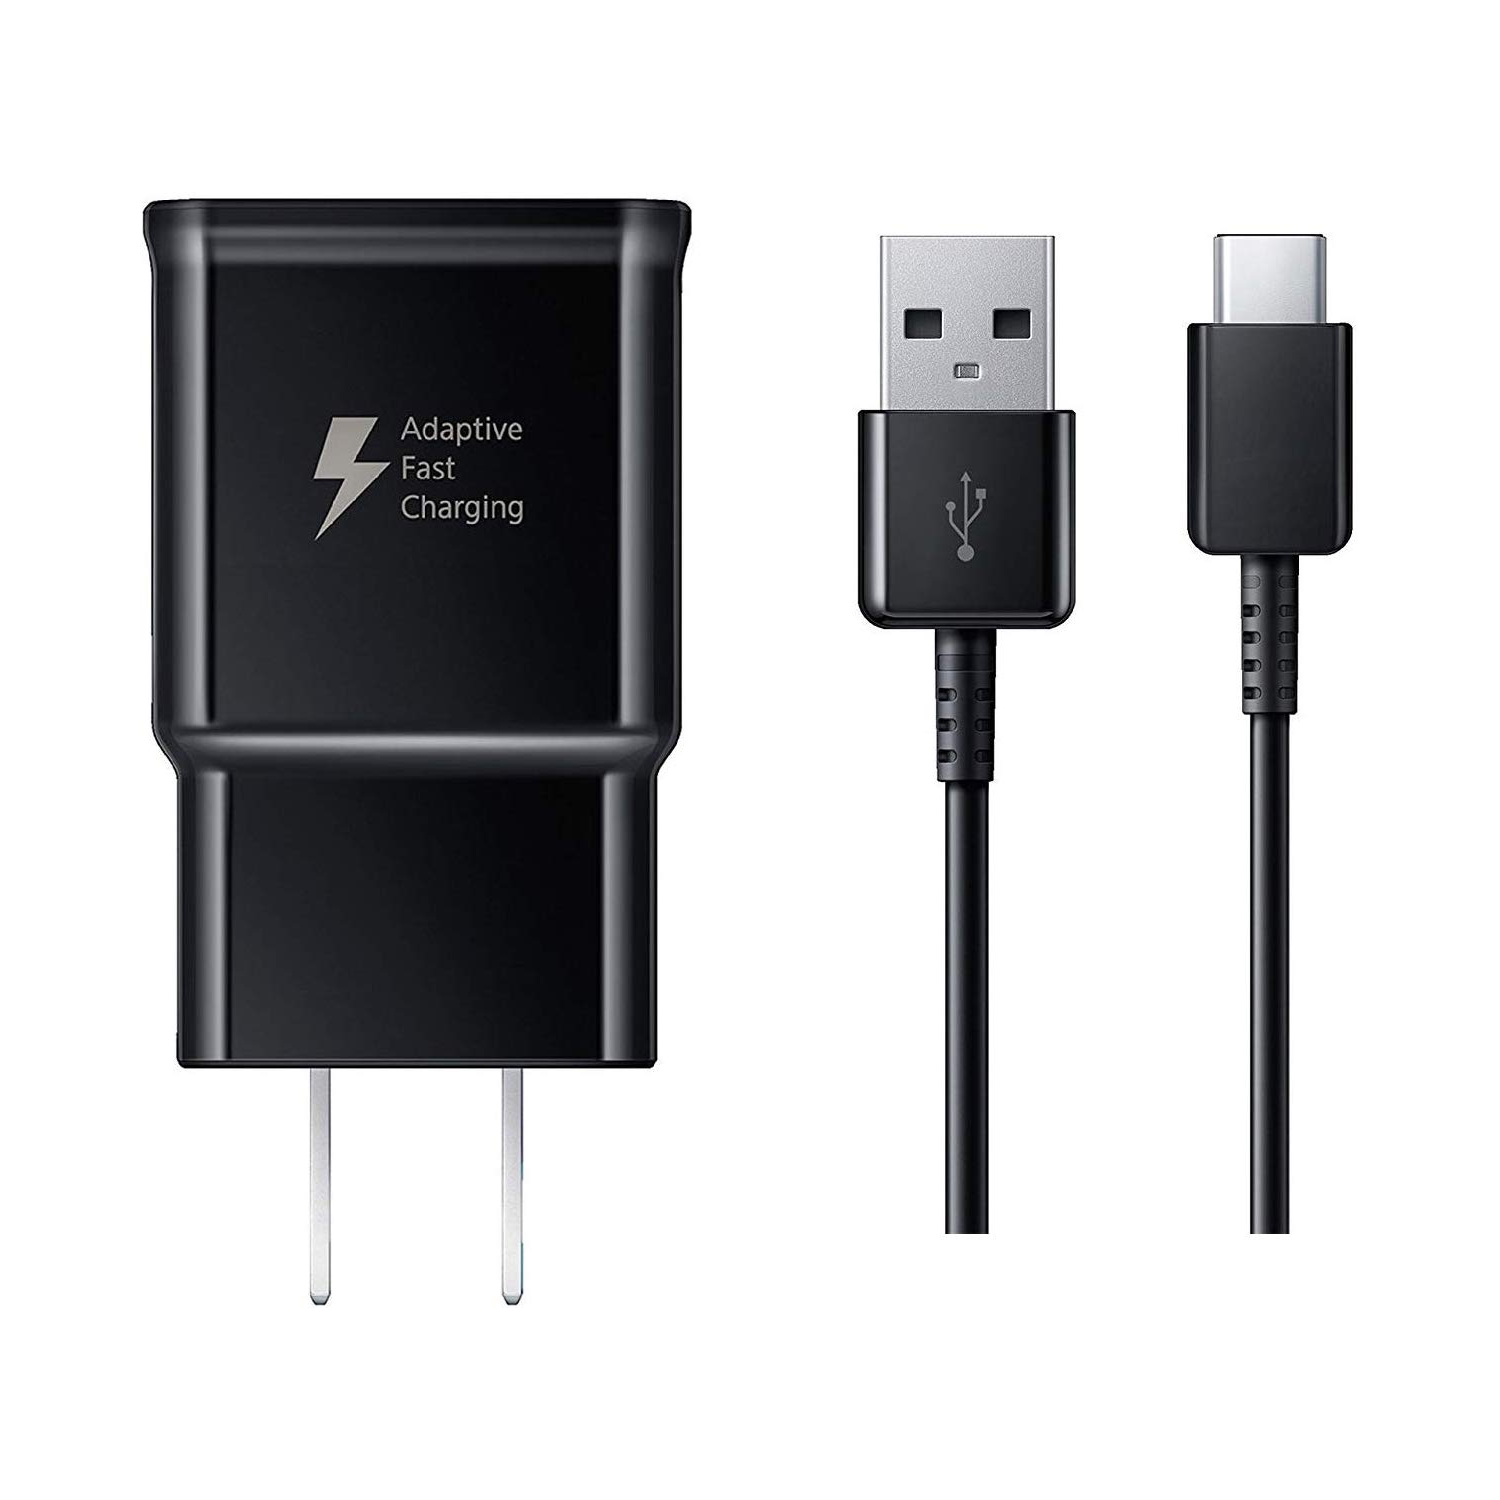 Samsung Galaxy Fast Adaptive Wall Charger with Type USB-C Cable for Galaxy S8, S9, S10, Note 8, 9 - Black - 2 Pack